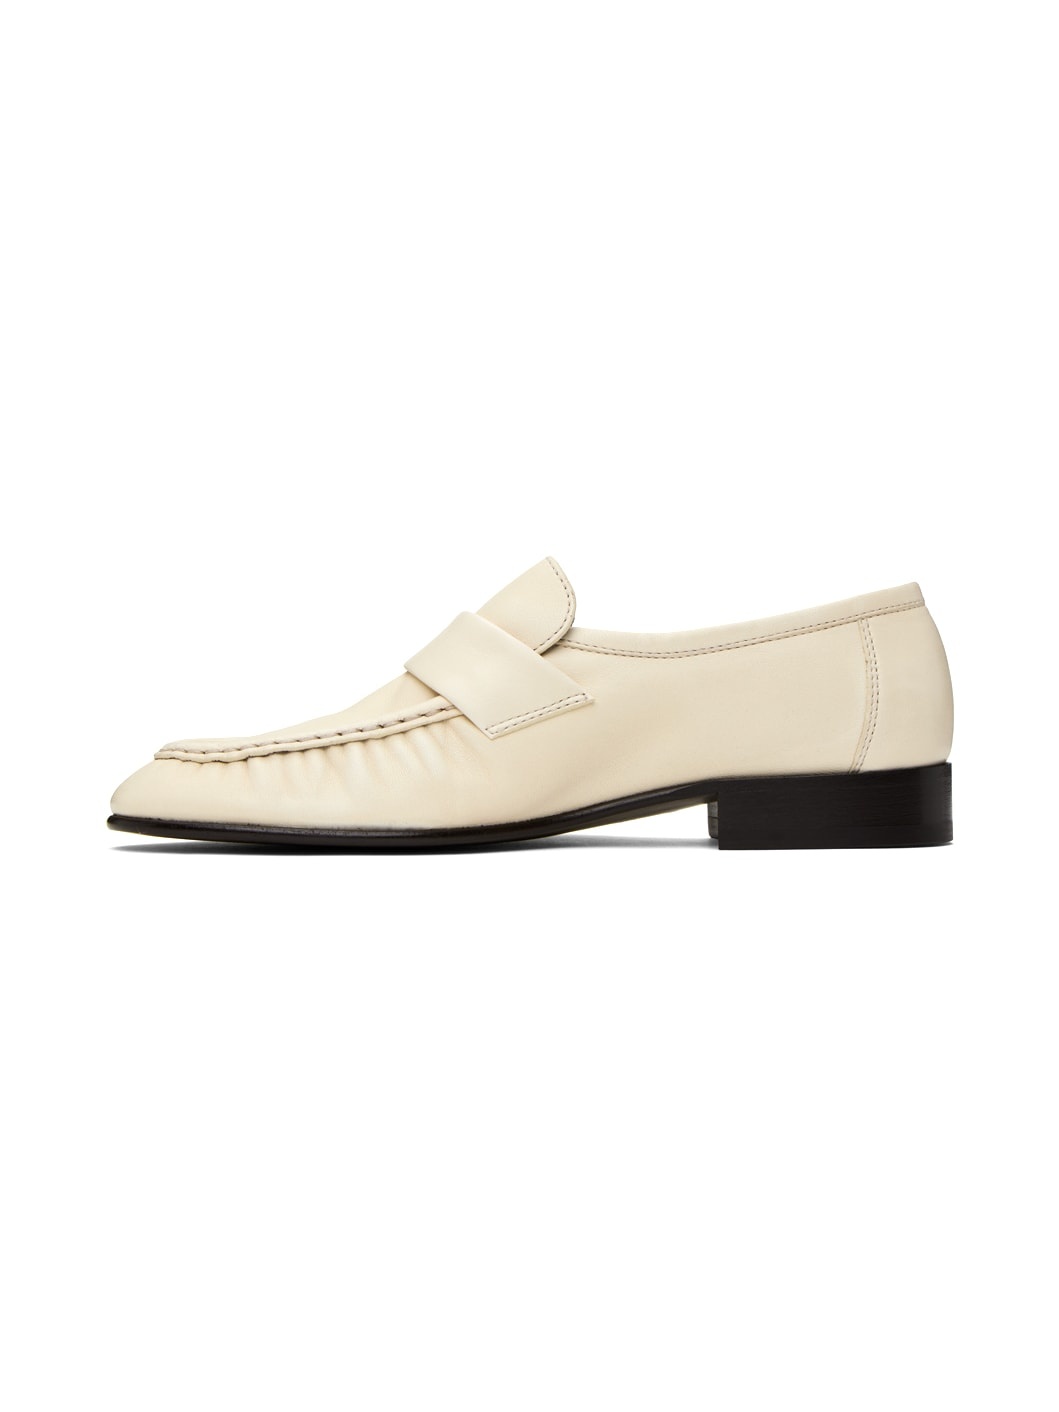 Off-White Soft Loafers - 3